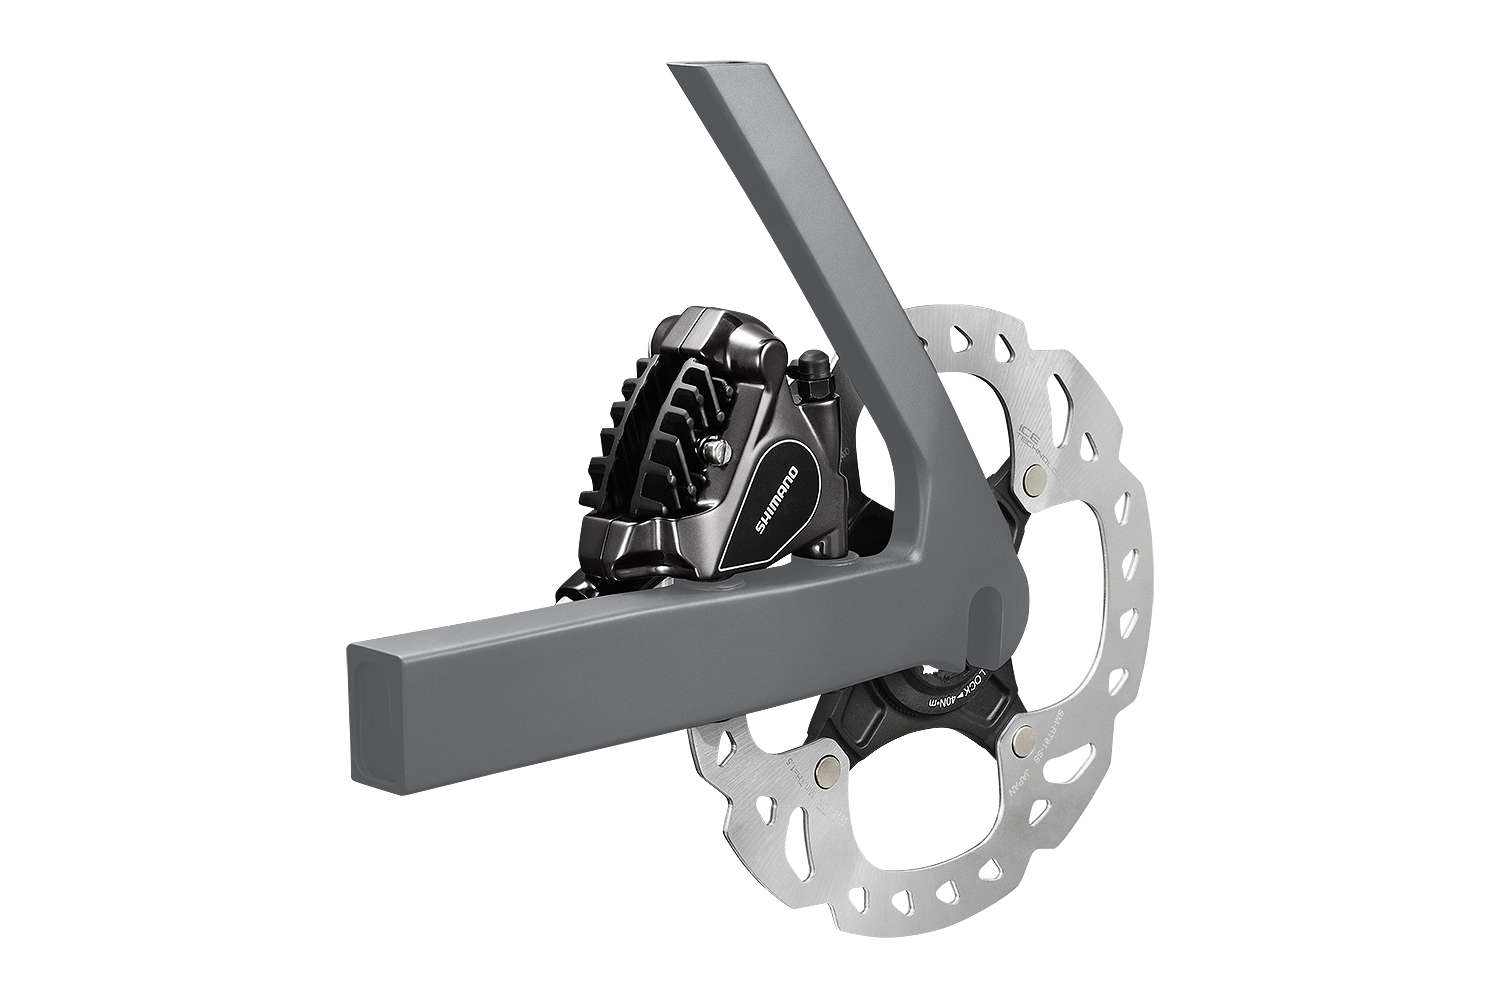 Photo: The new Flat Mount calipers are only compatible with Flat Mount frames and forks. 